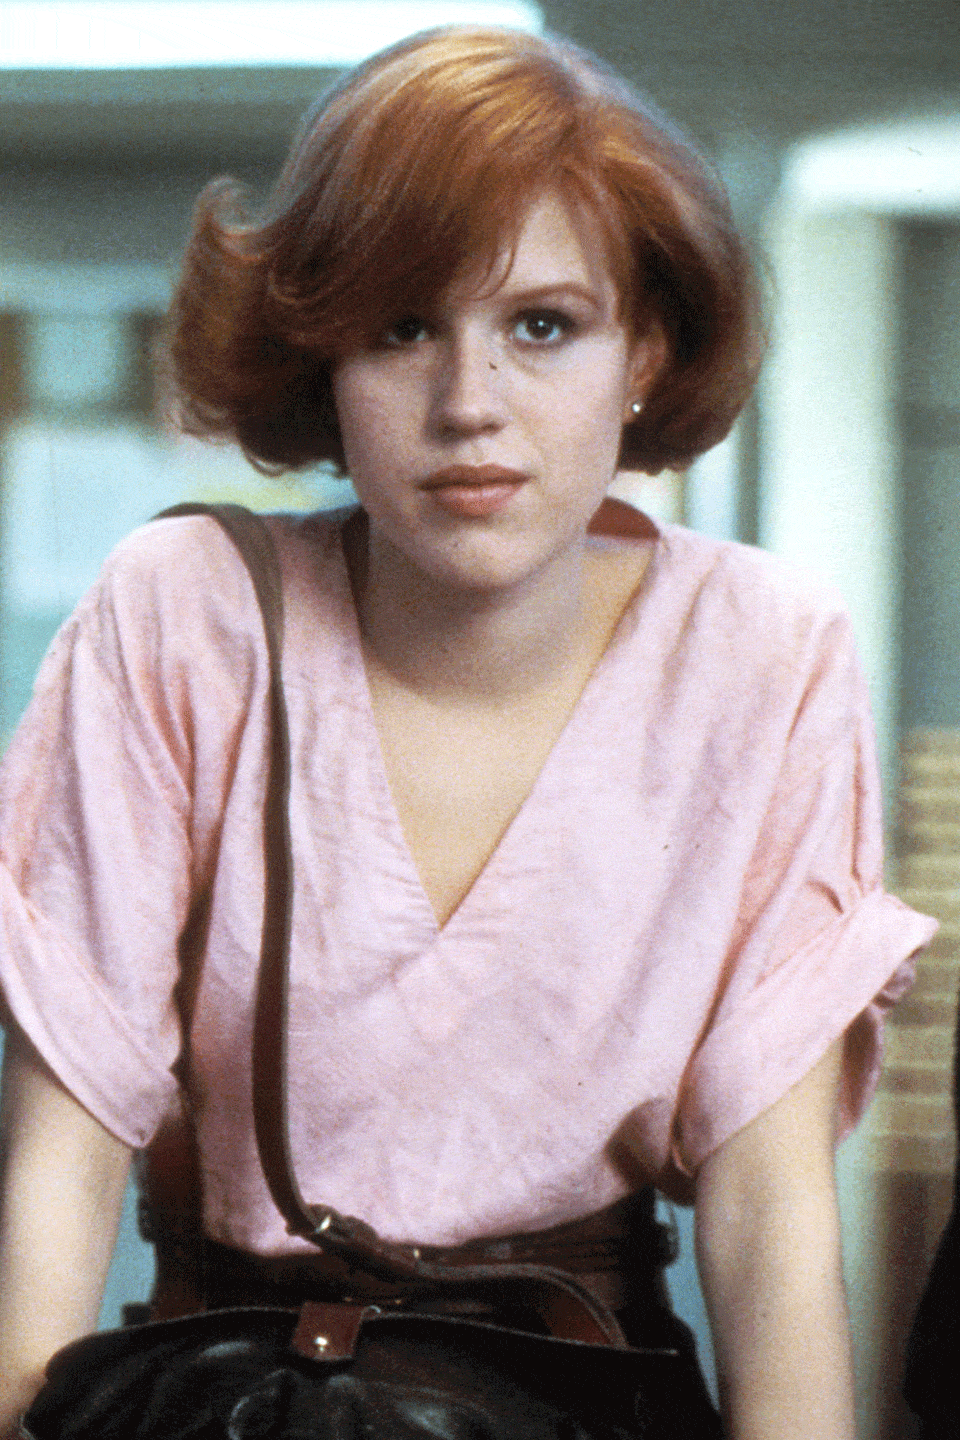 <p>The 1980s belonged to Ringwald, the awkward, lovable, gorgeous lead in John Hughes classic after John Hughes classic. In three consecutive years she starred in <em>Sixteen Candles</em>, <em>The Breakfast Club</em>, and <em>Pretty in Pink</em>, cementing her place in the teen movie hall of fame.</p>